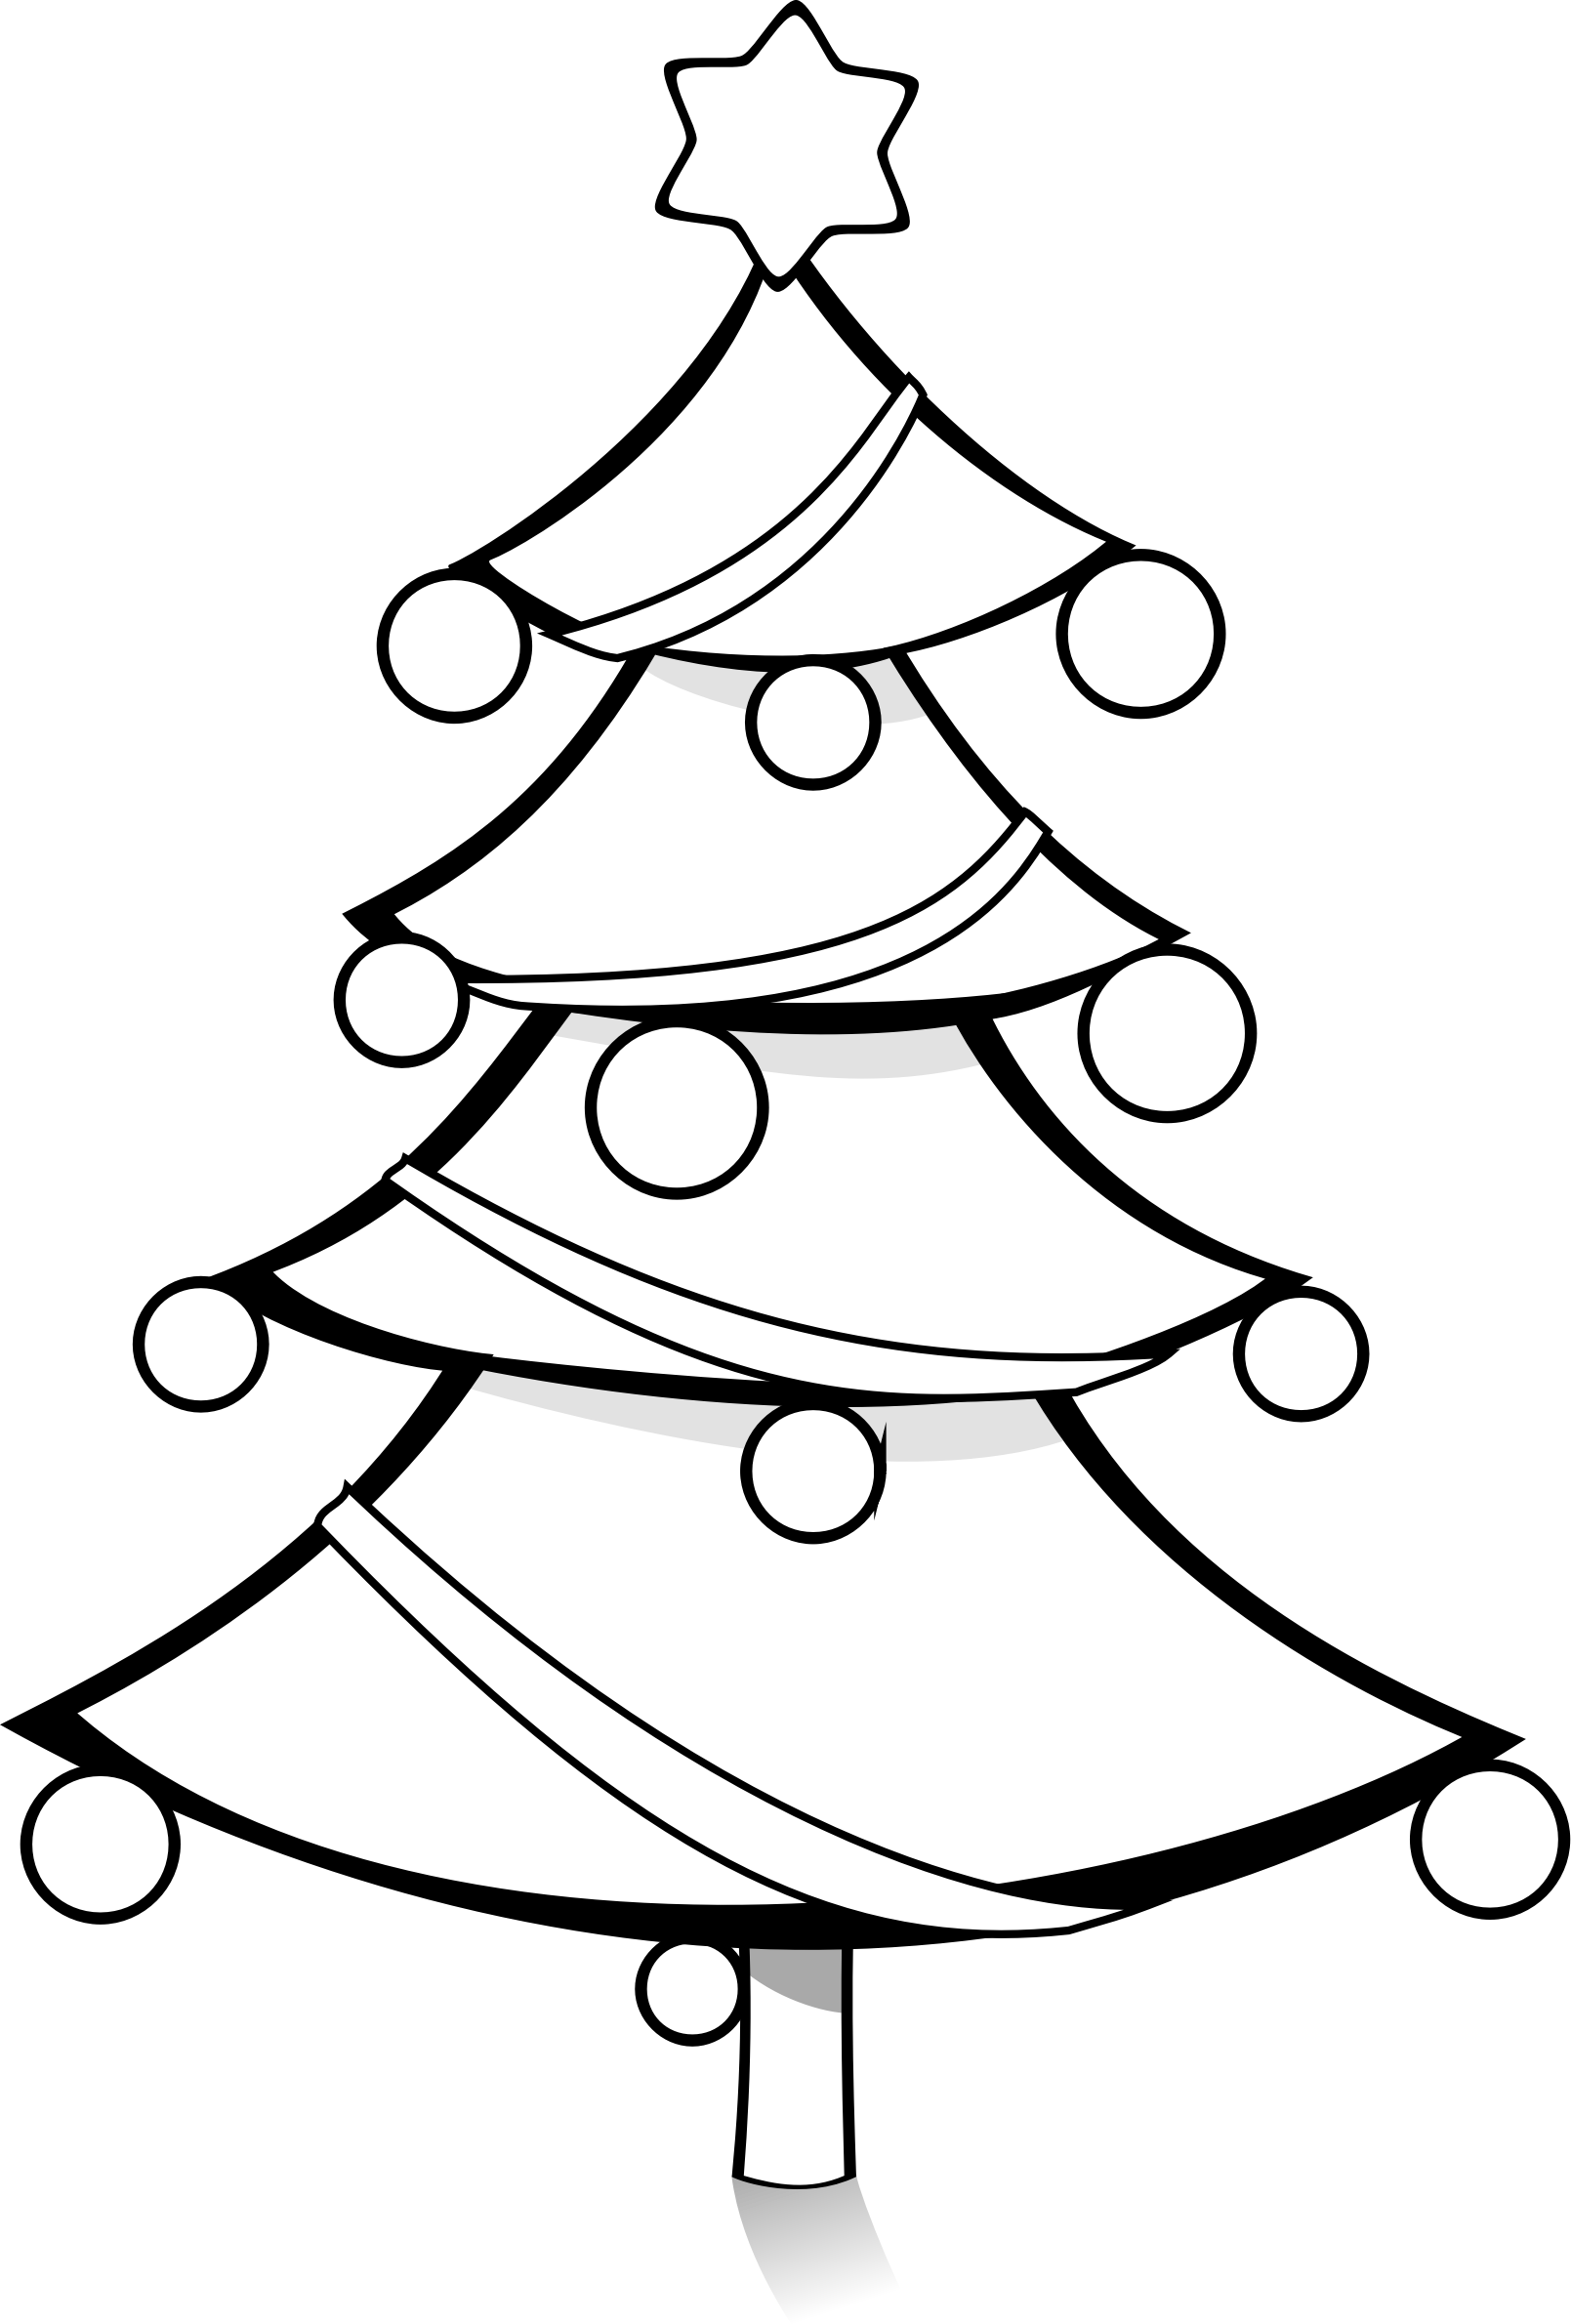 Download Christmas Tree Clip Art Black And White Christmas Tree Black And White Png Image With No Background Pngkey Com